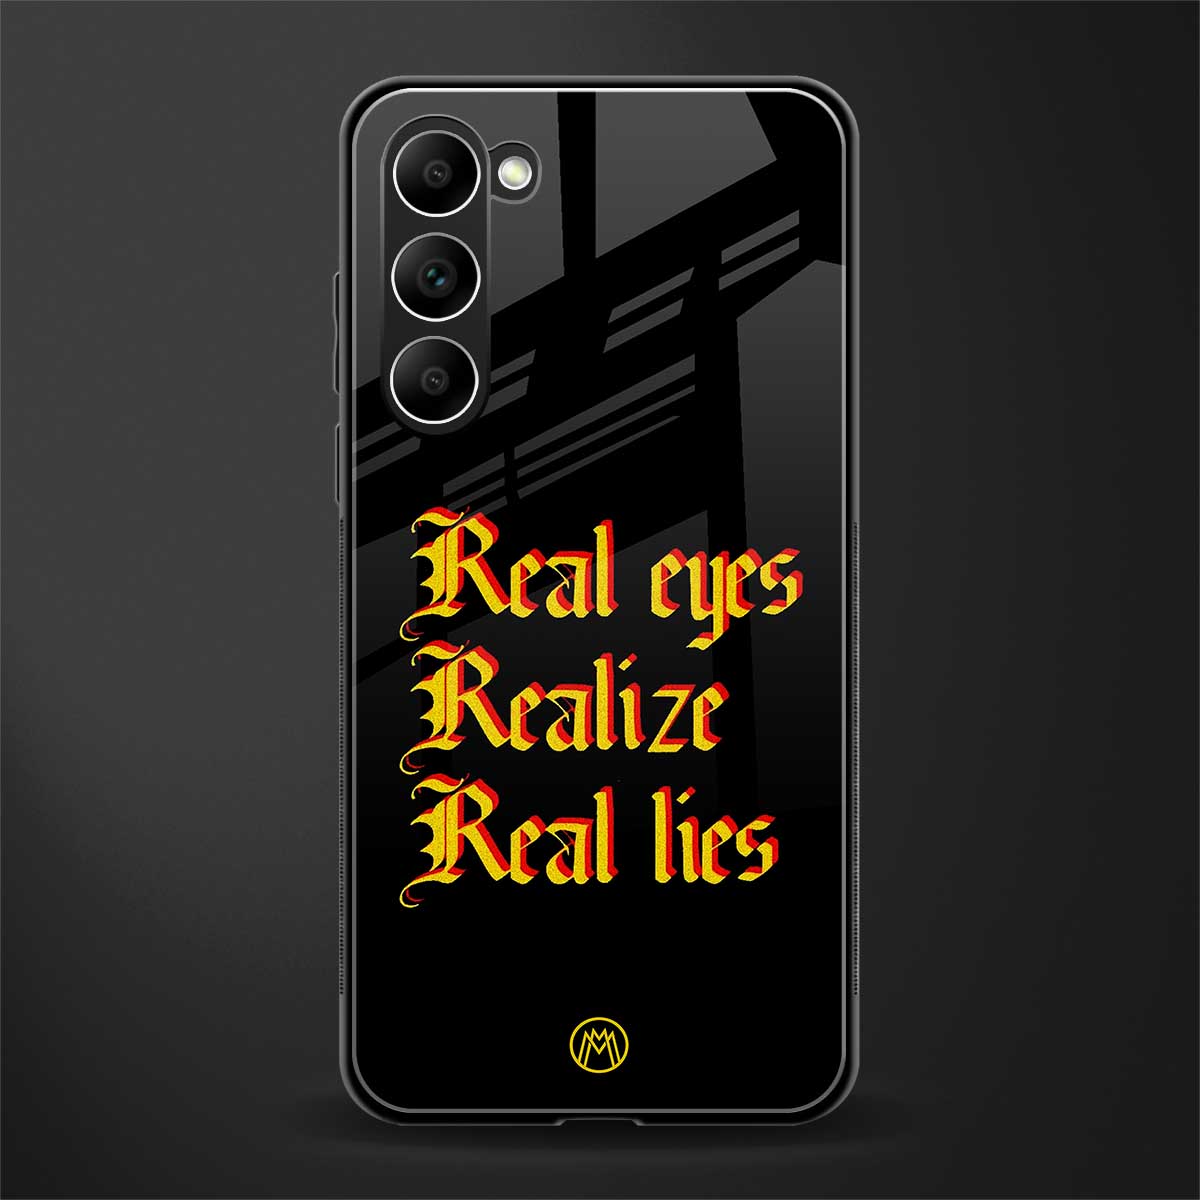 real eyes realize real lies quote glass case for phone case | glass case for samsung galaxy s23 plus